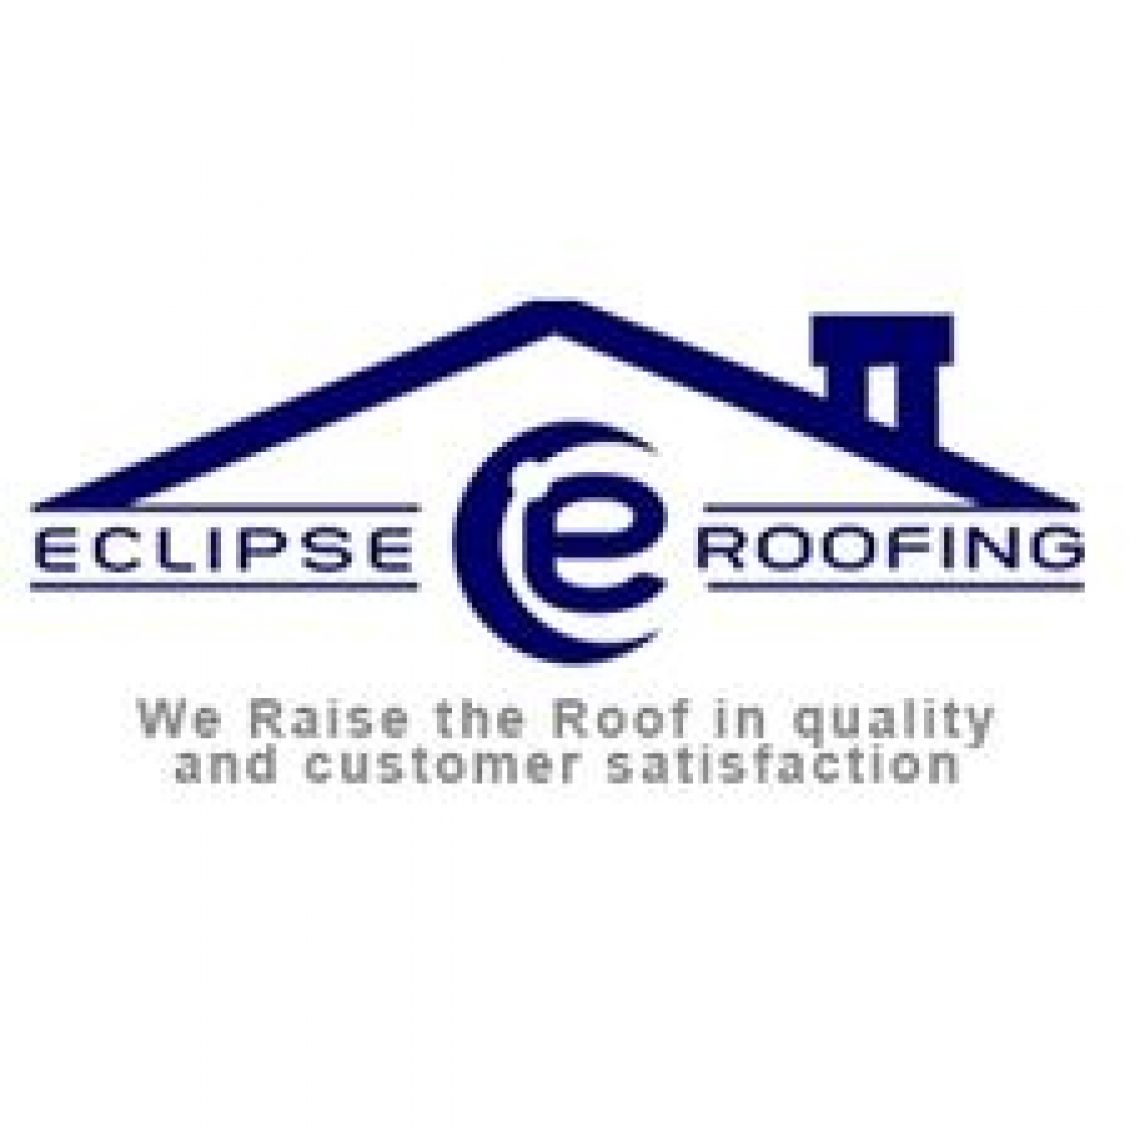 (Roofing) Ashley Choate